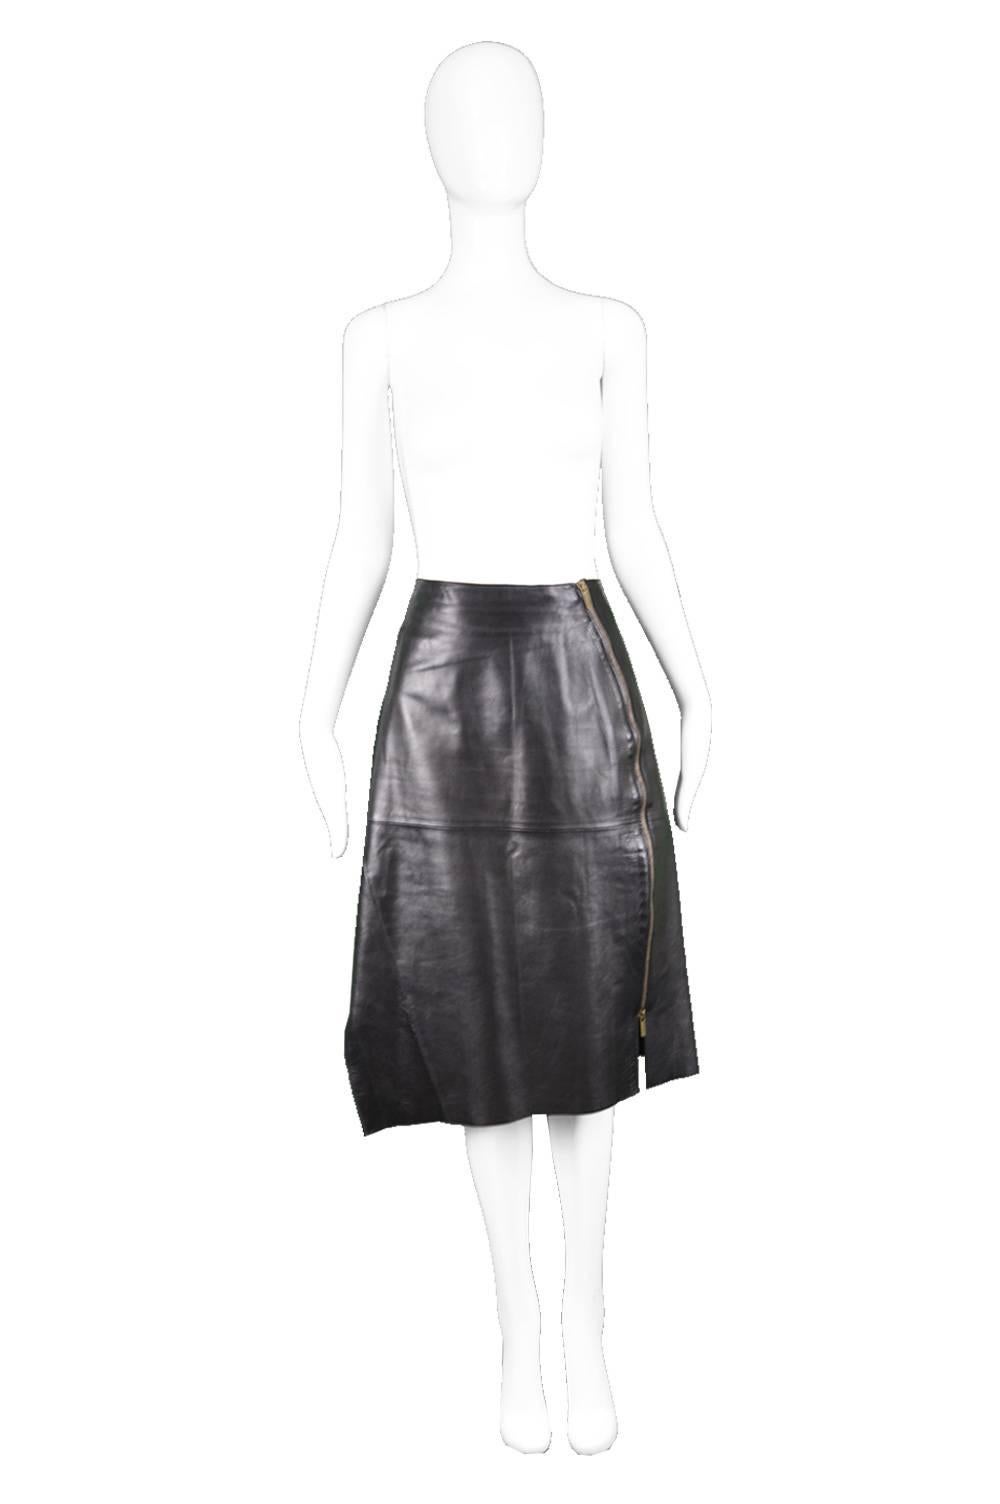 Kenzo Black Lambskin Leather Panelled Asymmetrical Biker Skirt, 1980s

Size: Marked EU 42 which is roughly a UK 14/ US 10. Please check measurements.  
Waist - 32” / 81cm
Hips - 40” / 101cm
Length (Waist to Hem) - 26” / 66cm

Condition: Excellent